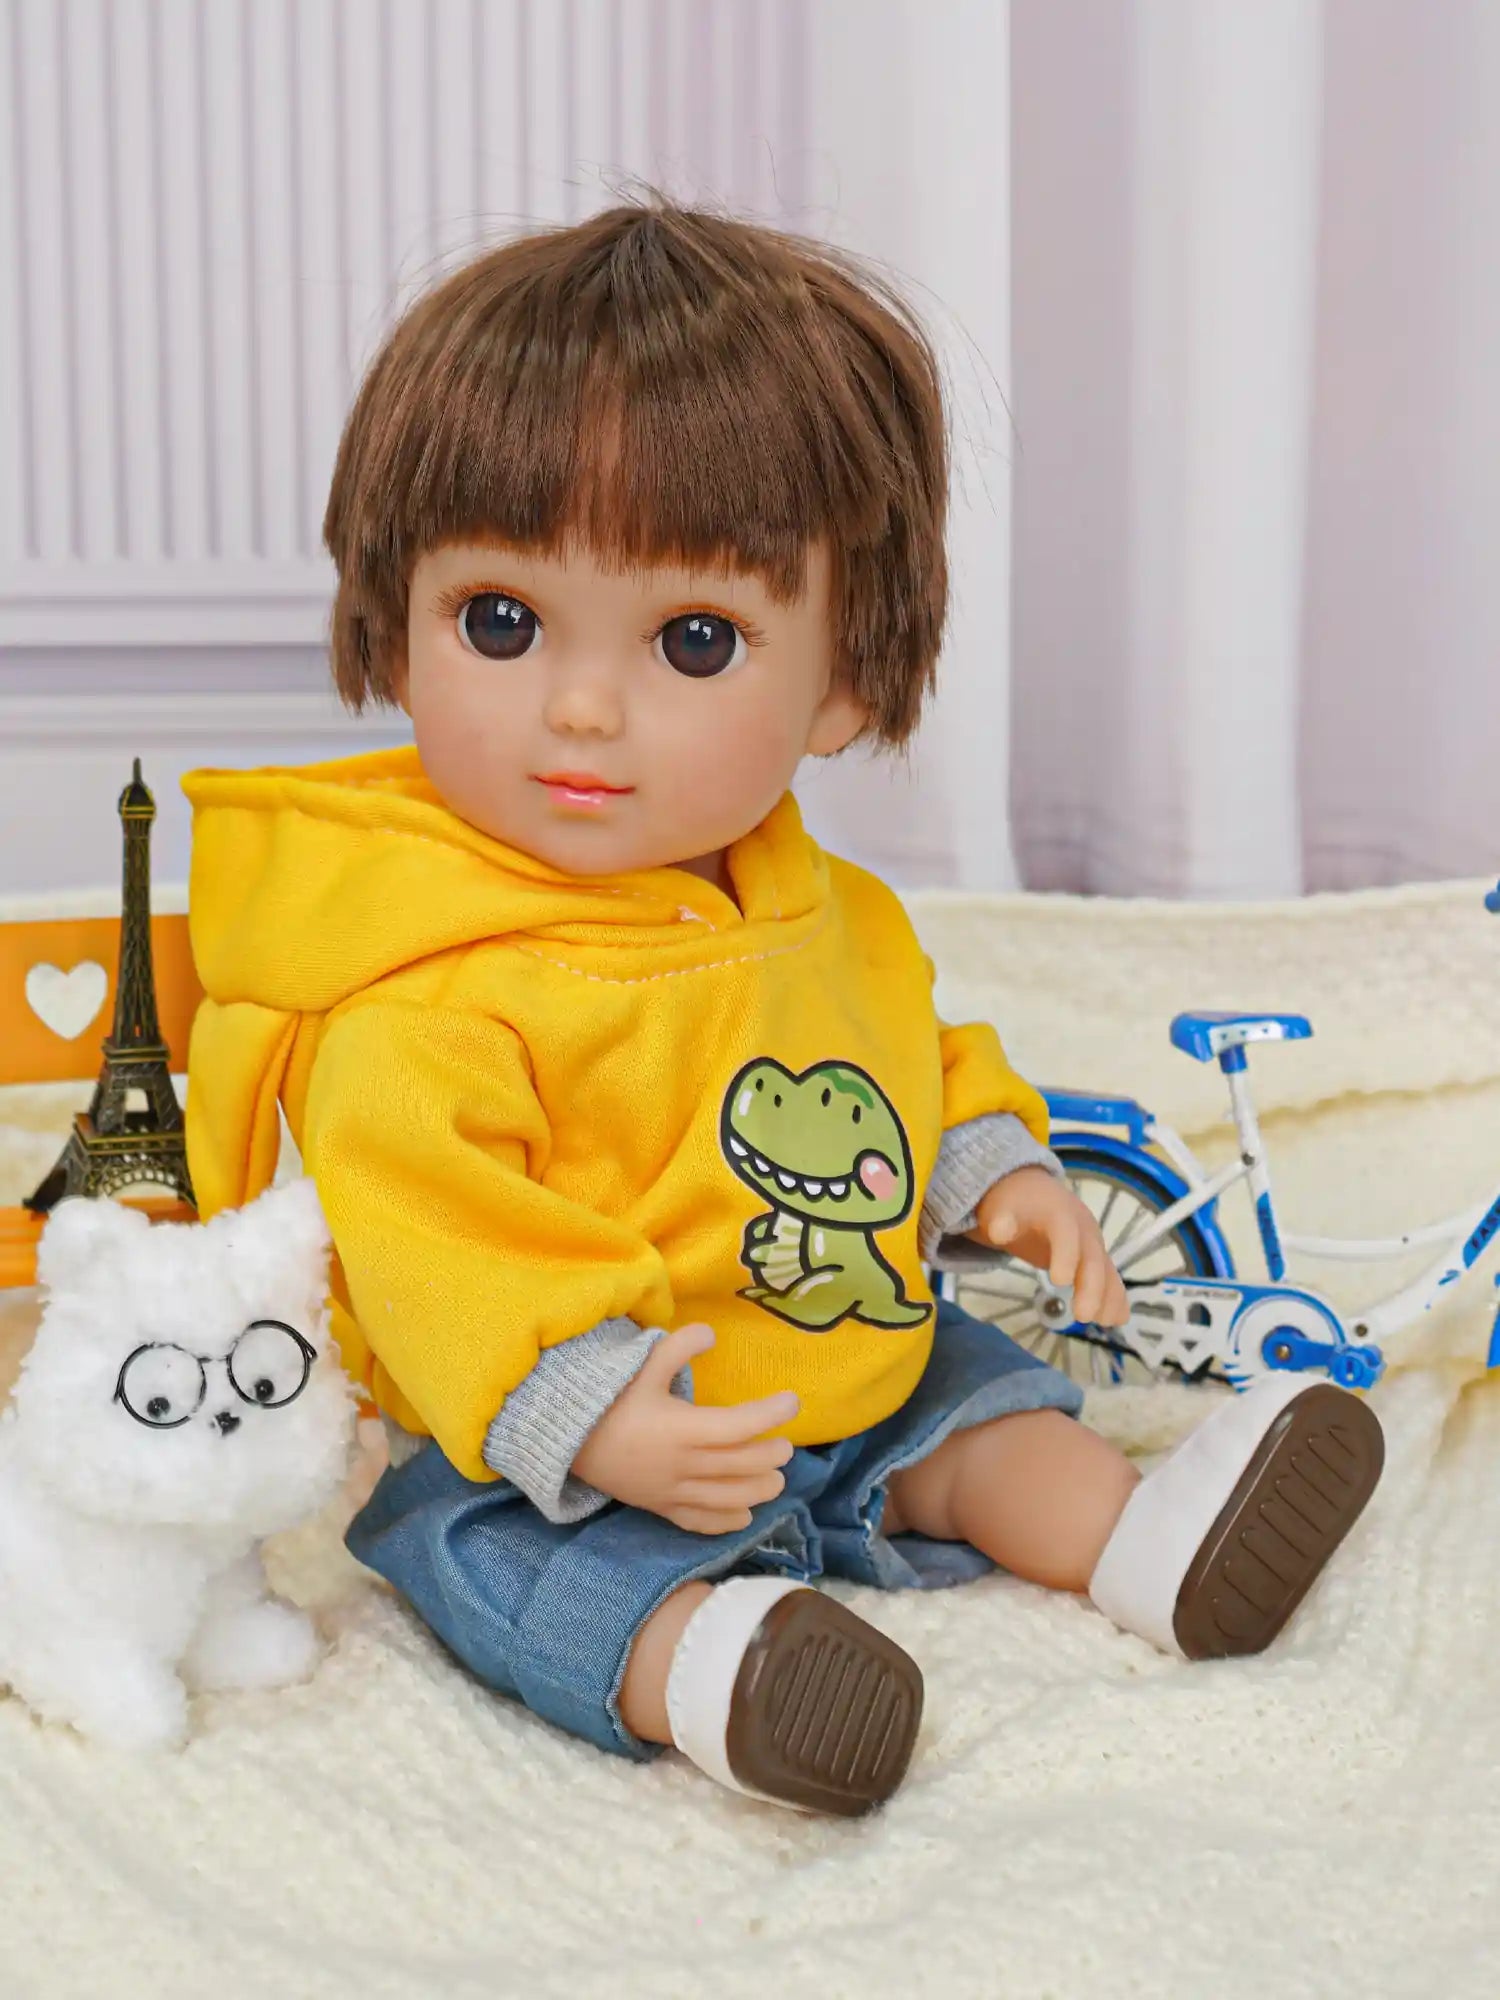 Smiling doll in yellow and denim, with a fluffy white dog and a small blue bicycle.